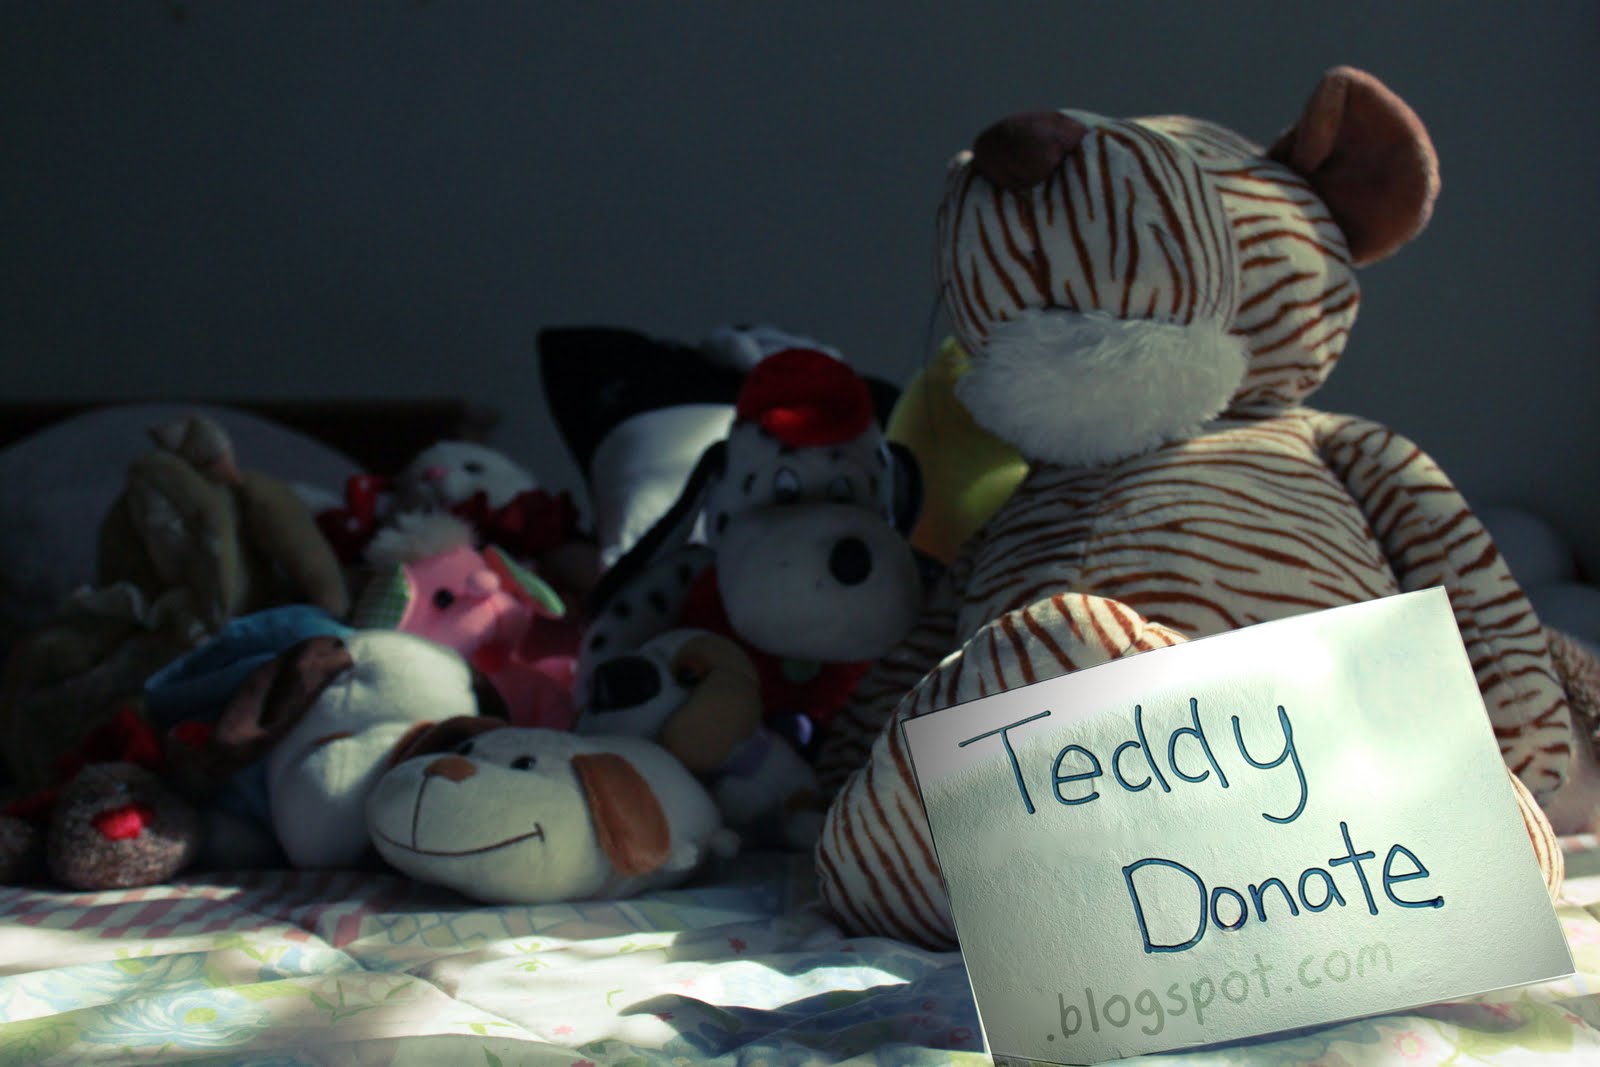 Every teddy counts towards charity !